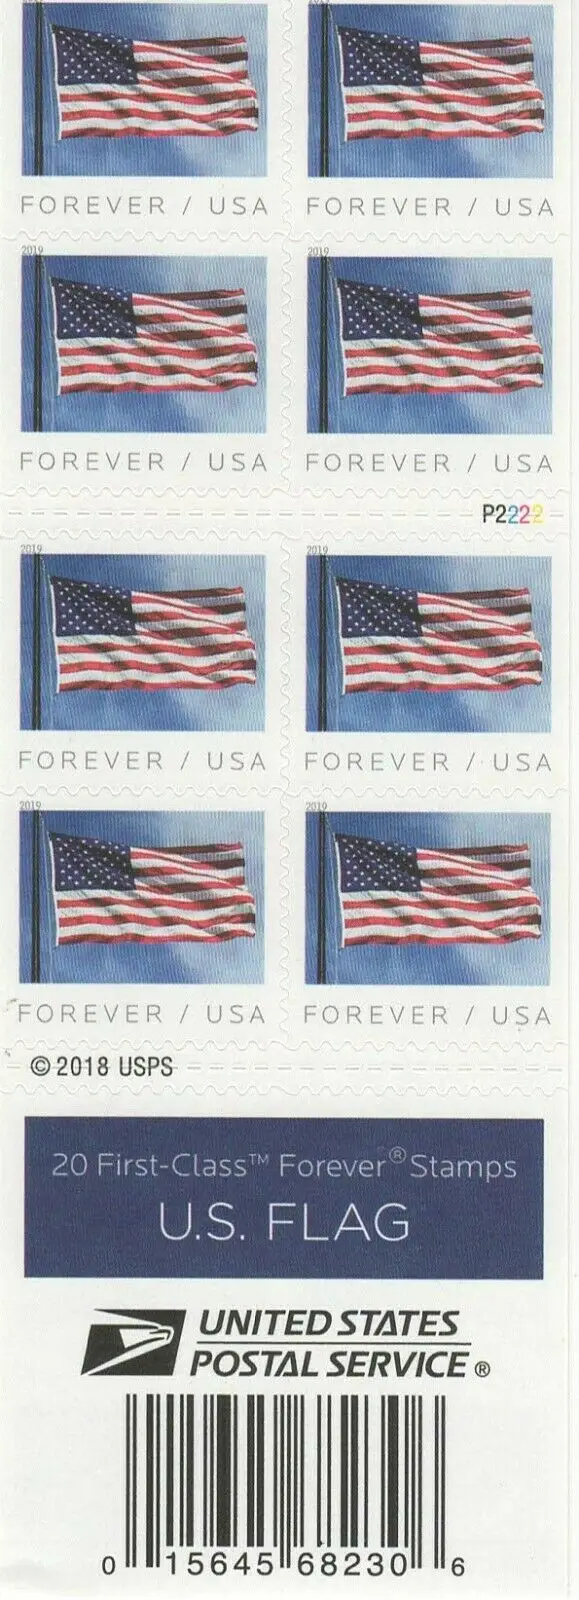 

2019 US Flag 1 Books of 20 USPS Forever First Class Postage Stamps Patriotic American Celebration (20 Stamps)